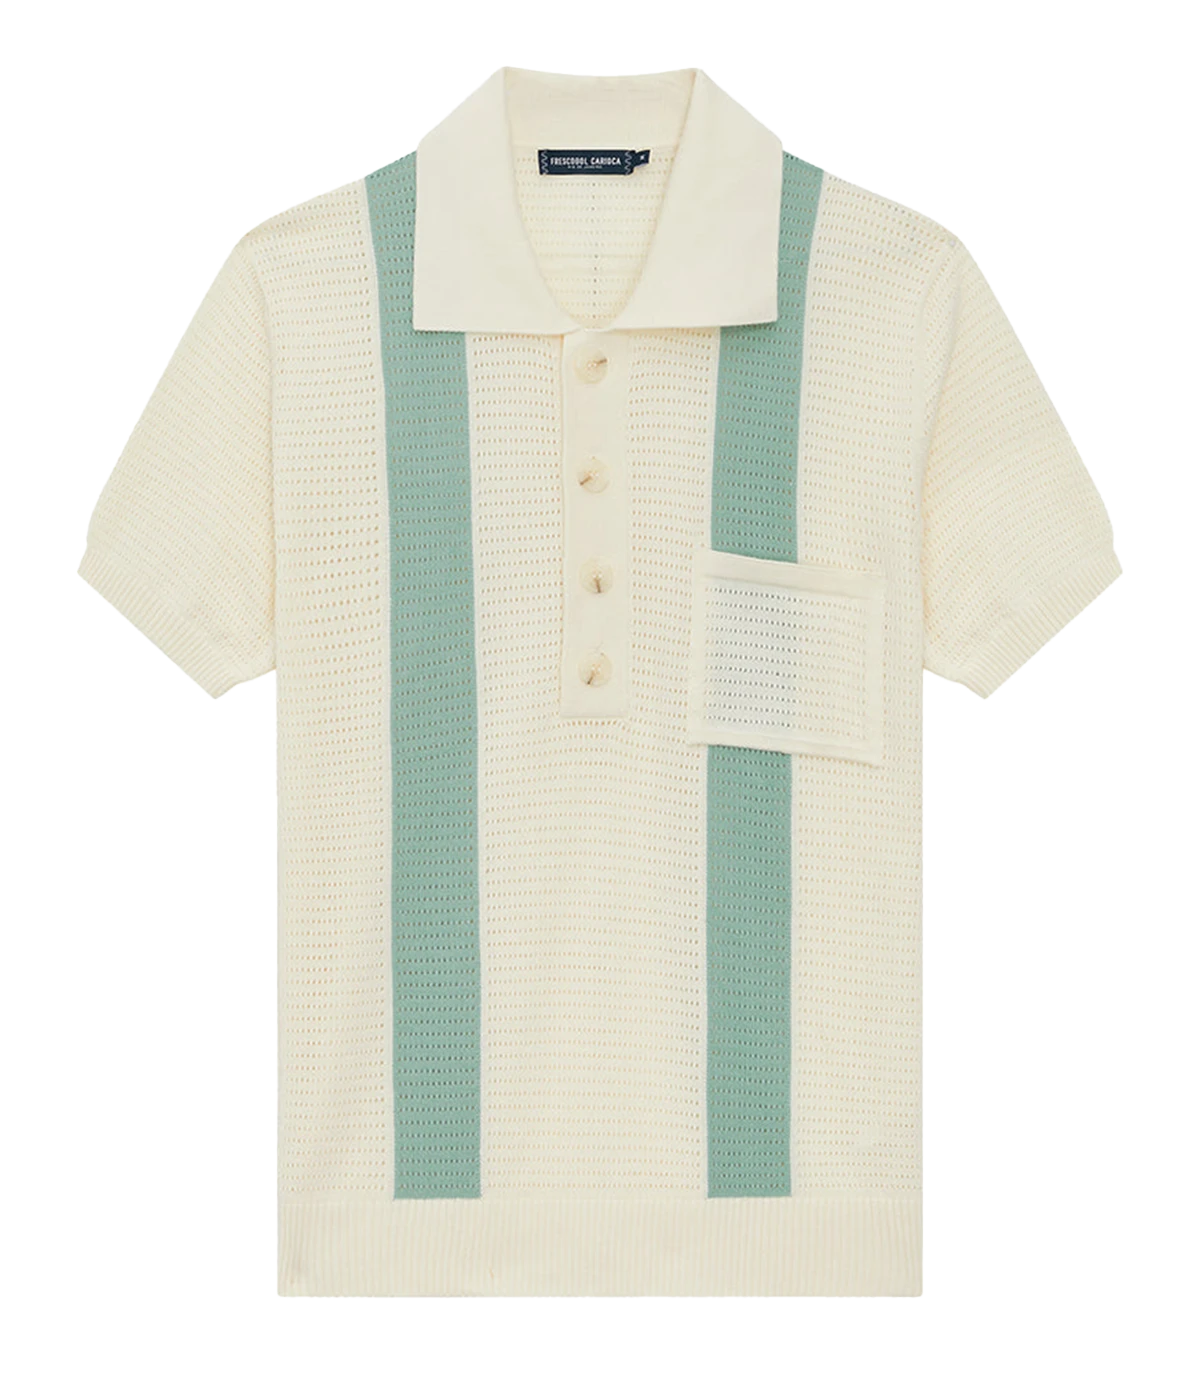 Clemente Crochet SS Polo in White Sands & Dark Mineral